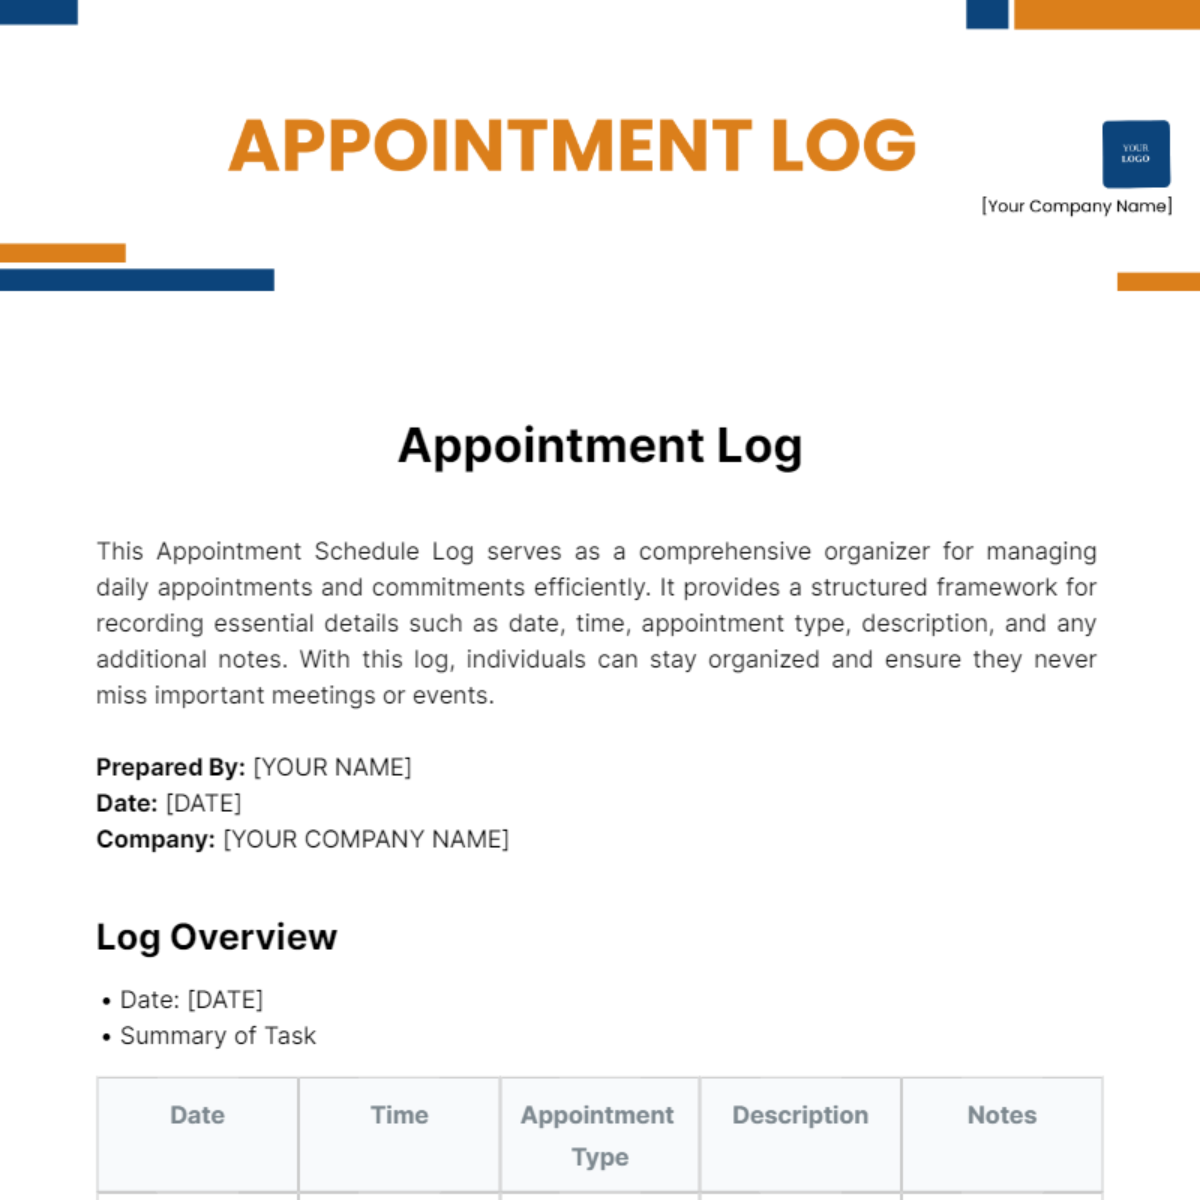 Appointment Log Template